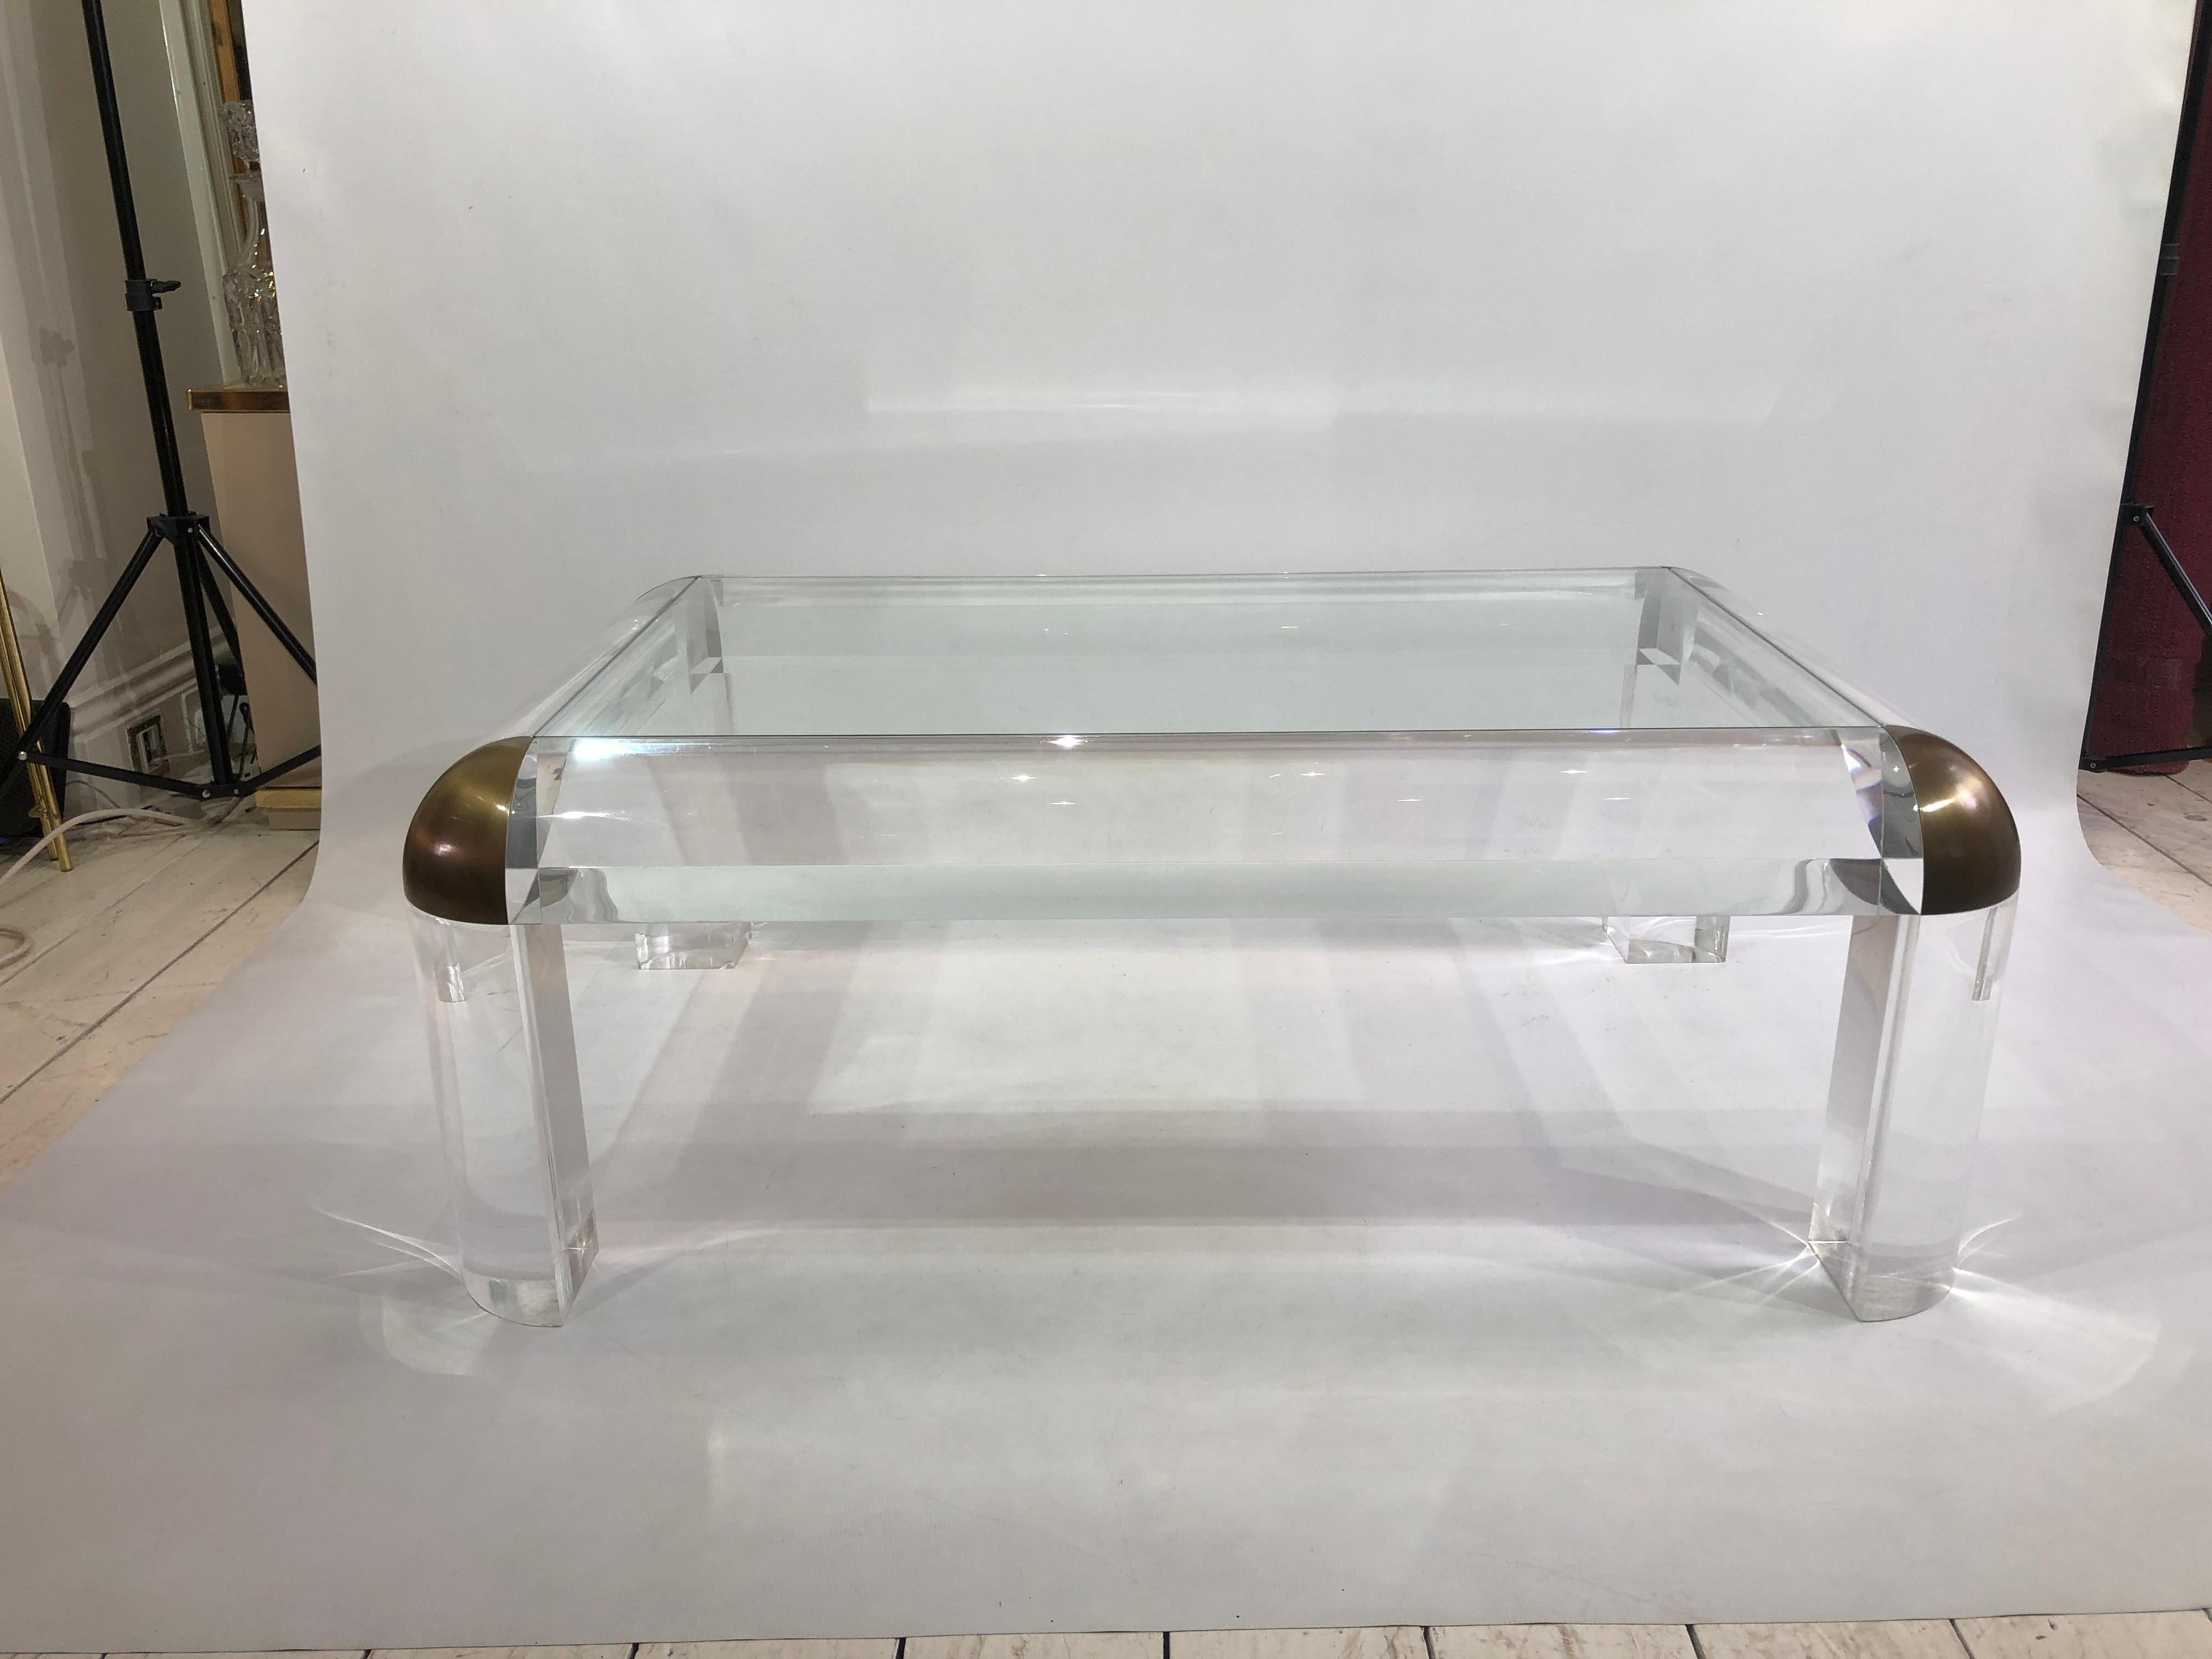 This amazing lucite and brass coffee table, very much in the style of Karl Springer, was imported from the United States. Four sturdy legs house a clear glass top, and at each edge you find a curved brass join in an antique finish. 

This is an